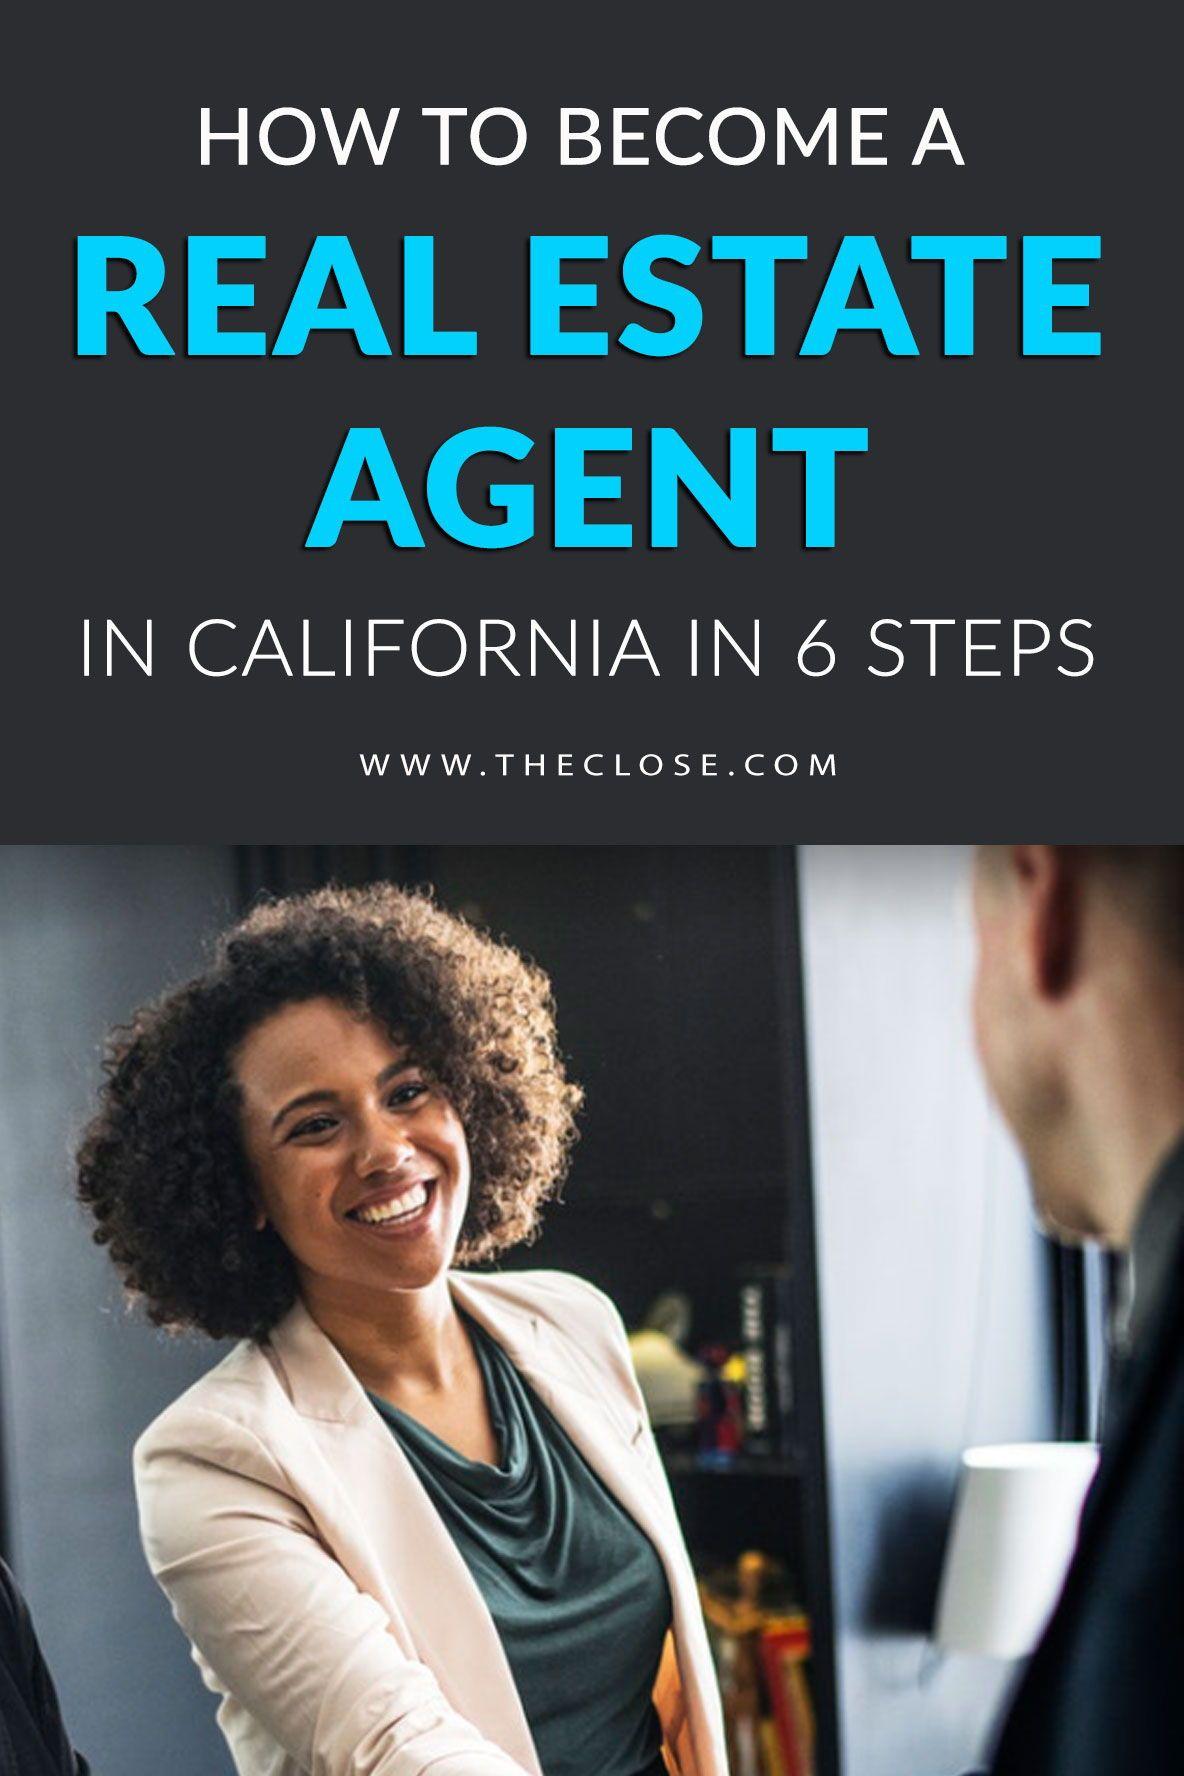 How to become real estate agent california audiobook